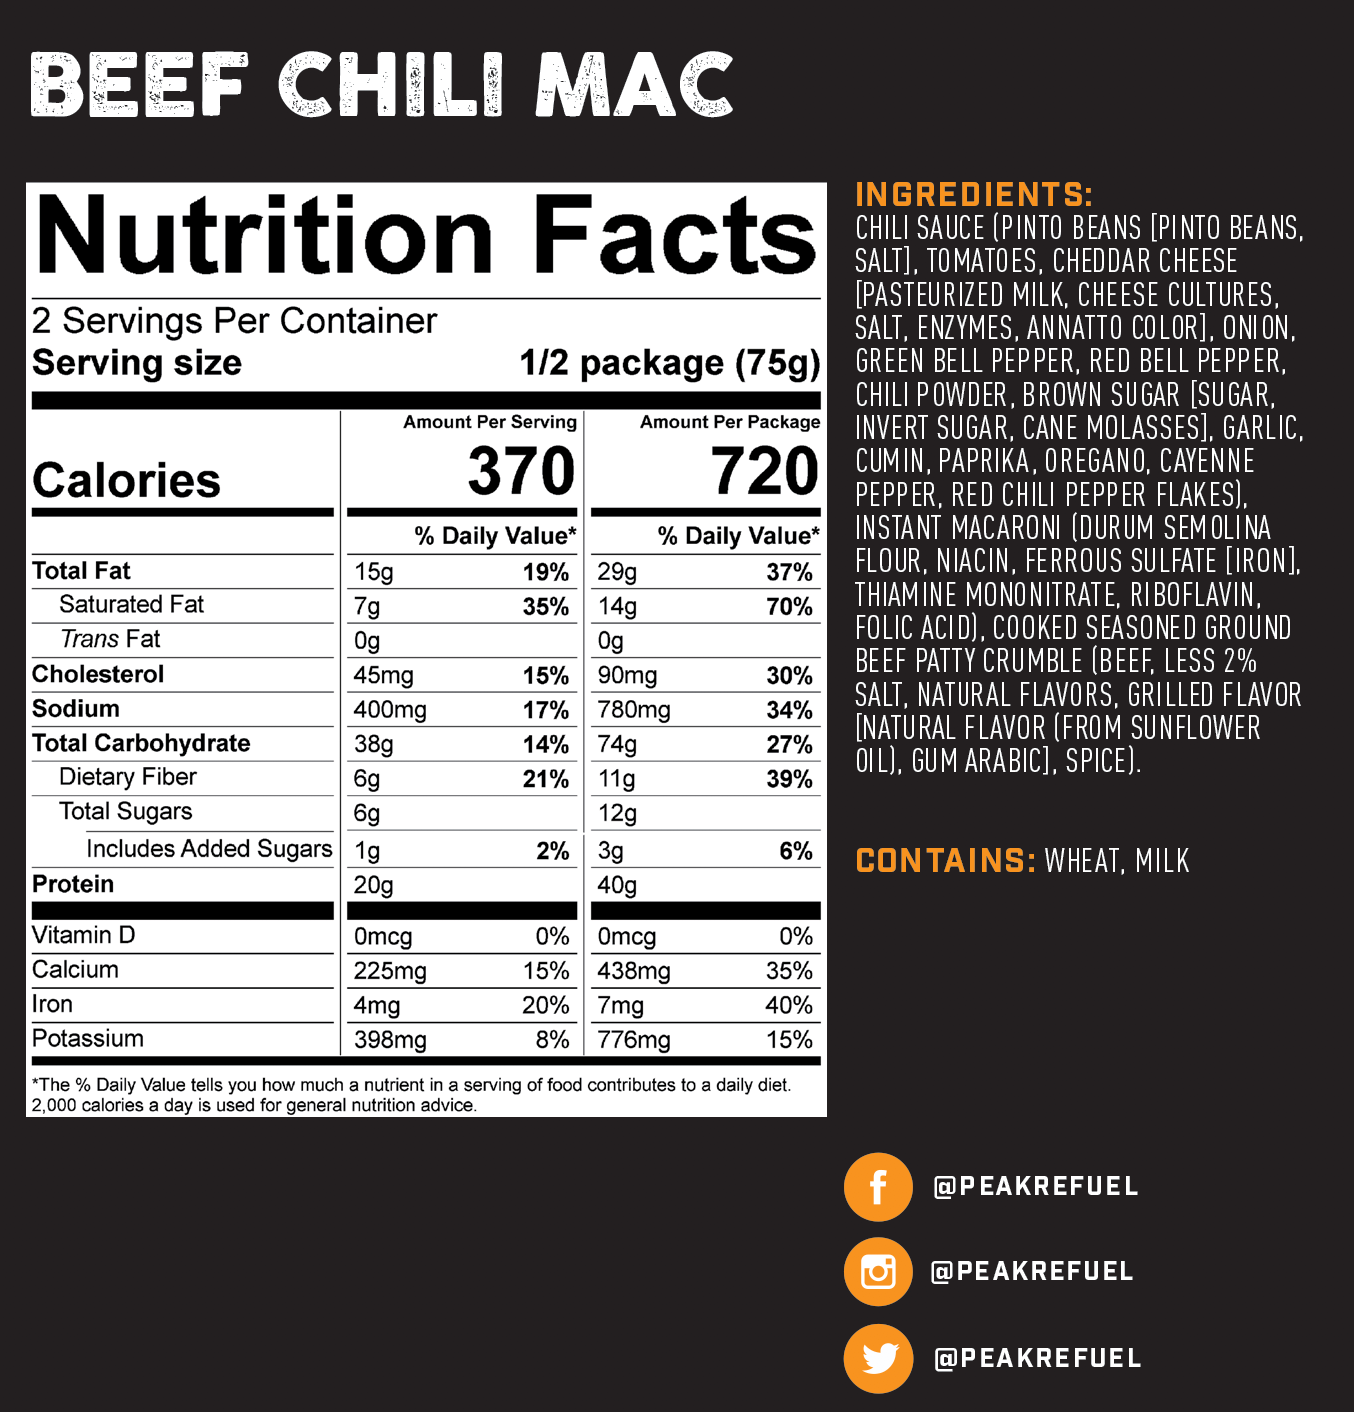 Beef chili mac meal nutrition facts 